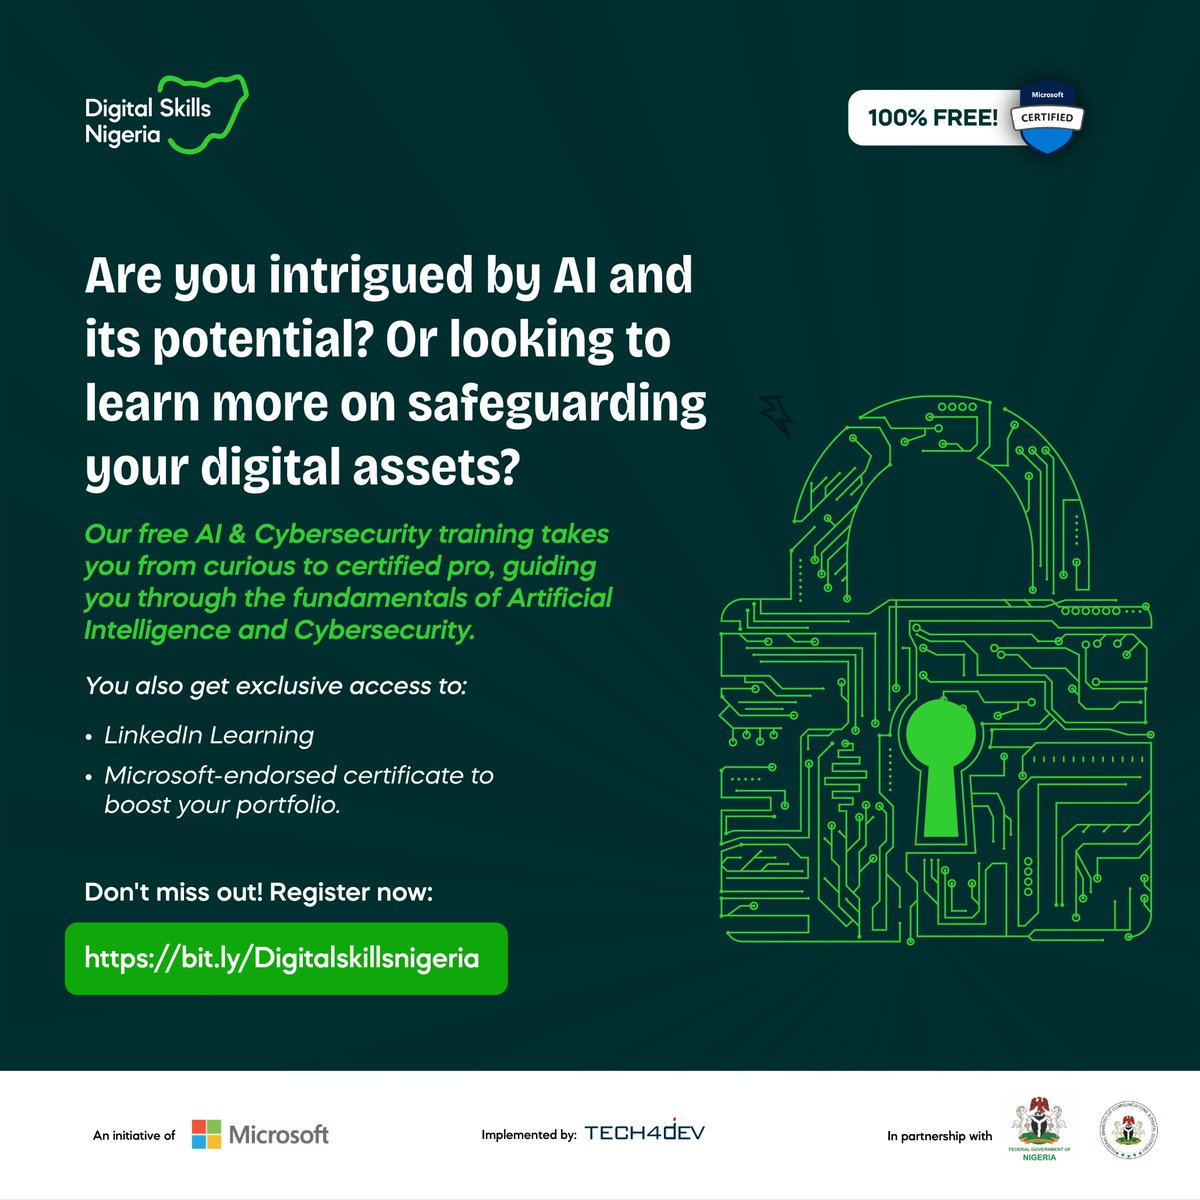 Are you looking to learn more about AI & Cybersecurity? We've Got You Covered! 

Our FREE training takes you from curious to certified pro in both AI and Cybersecurity. Learn the fundamentals of these in-demand skills and unlock exclusive benefits: 

- Understand AI and build…